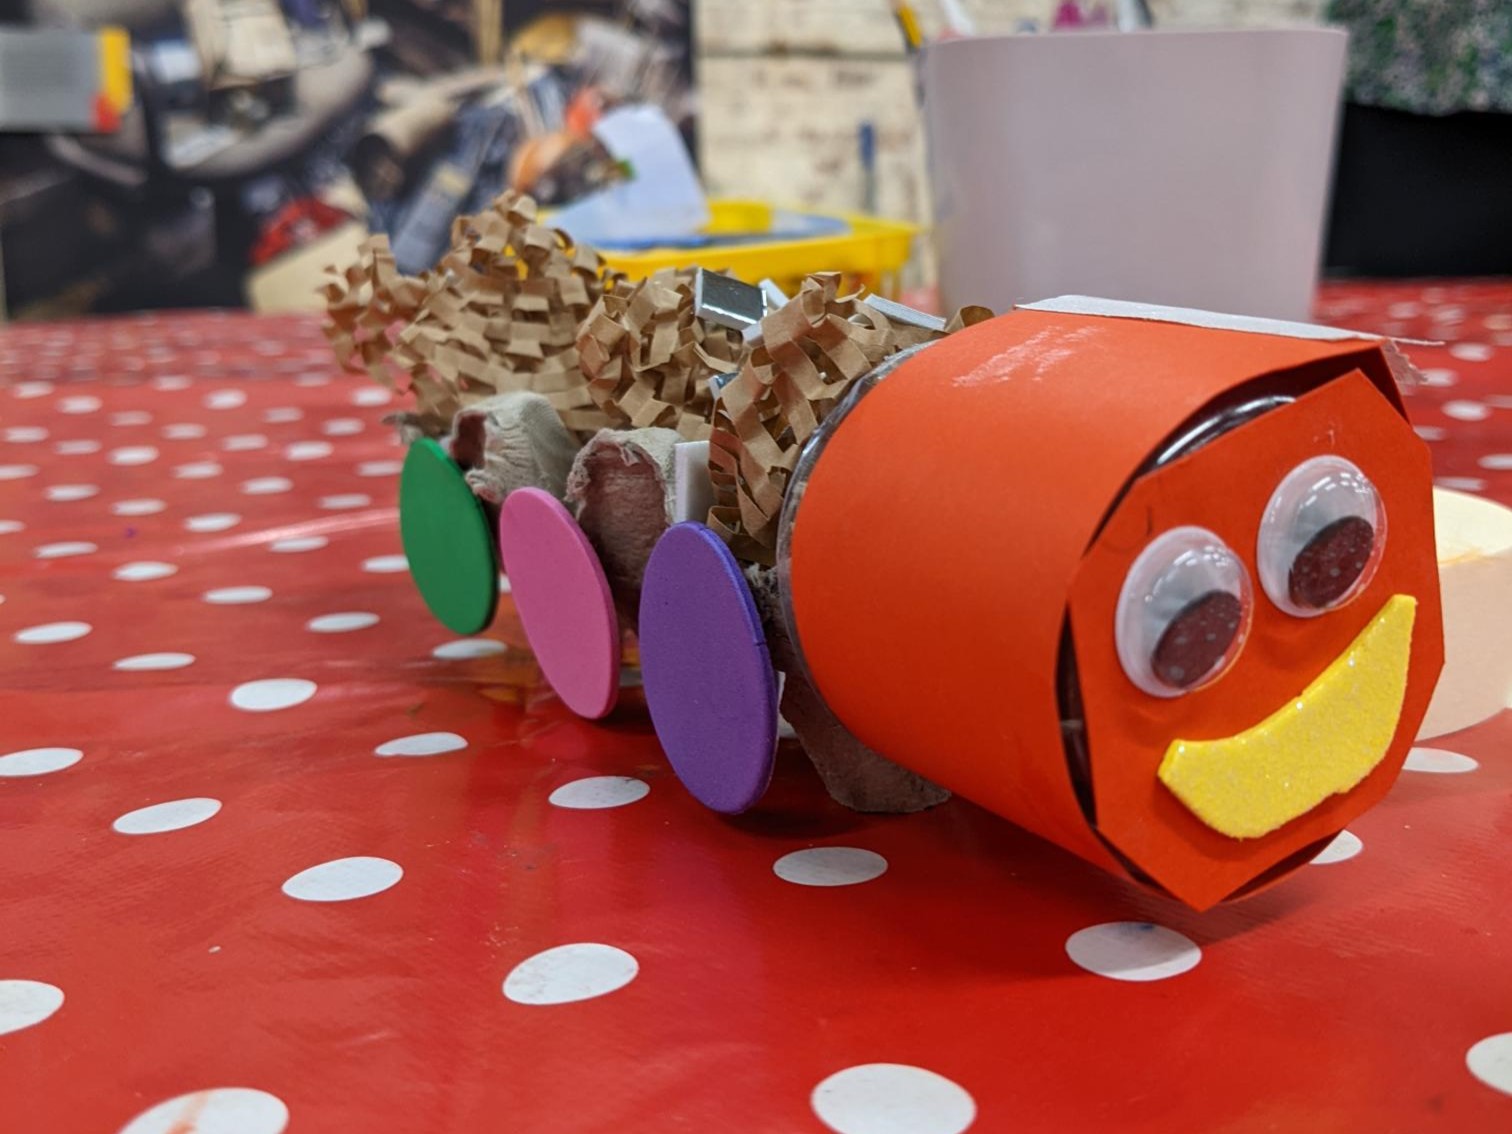 A carboard train made out of a red cylinder at the front and an egg tray as carriage. The train has carboard wheels and eyes and a big smile!